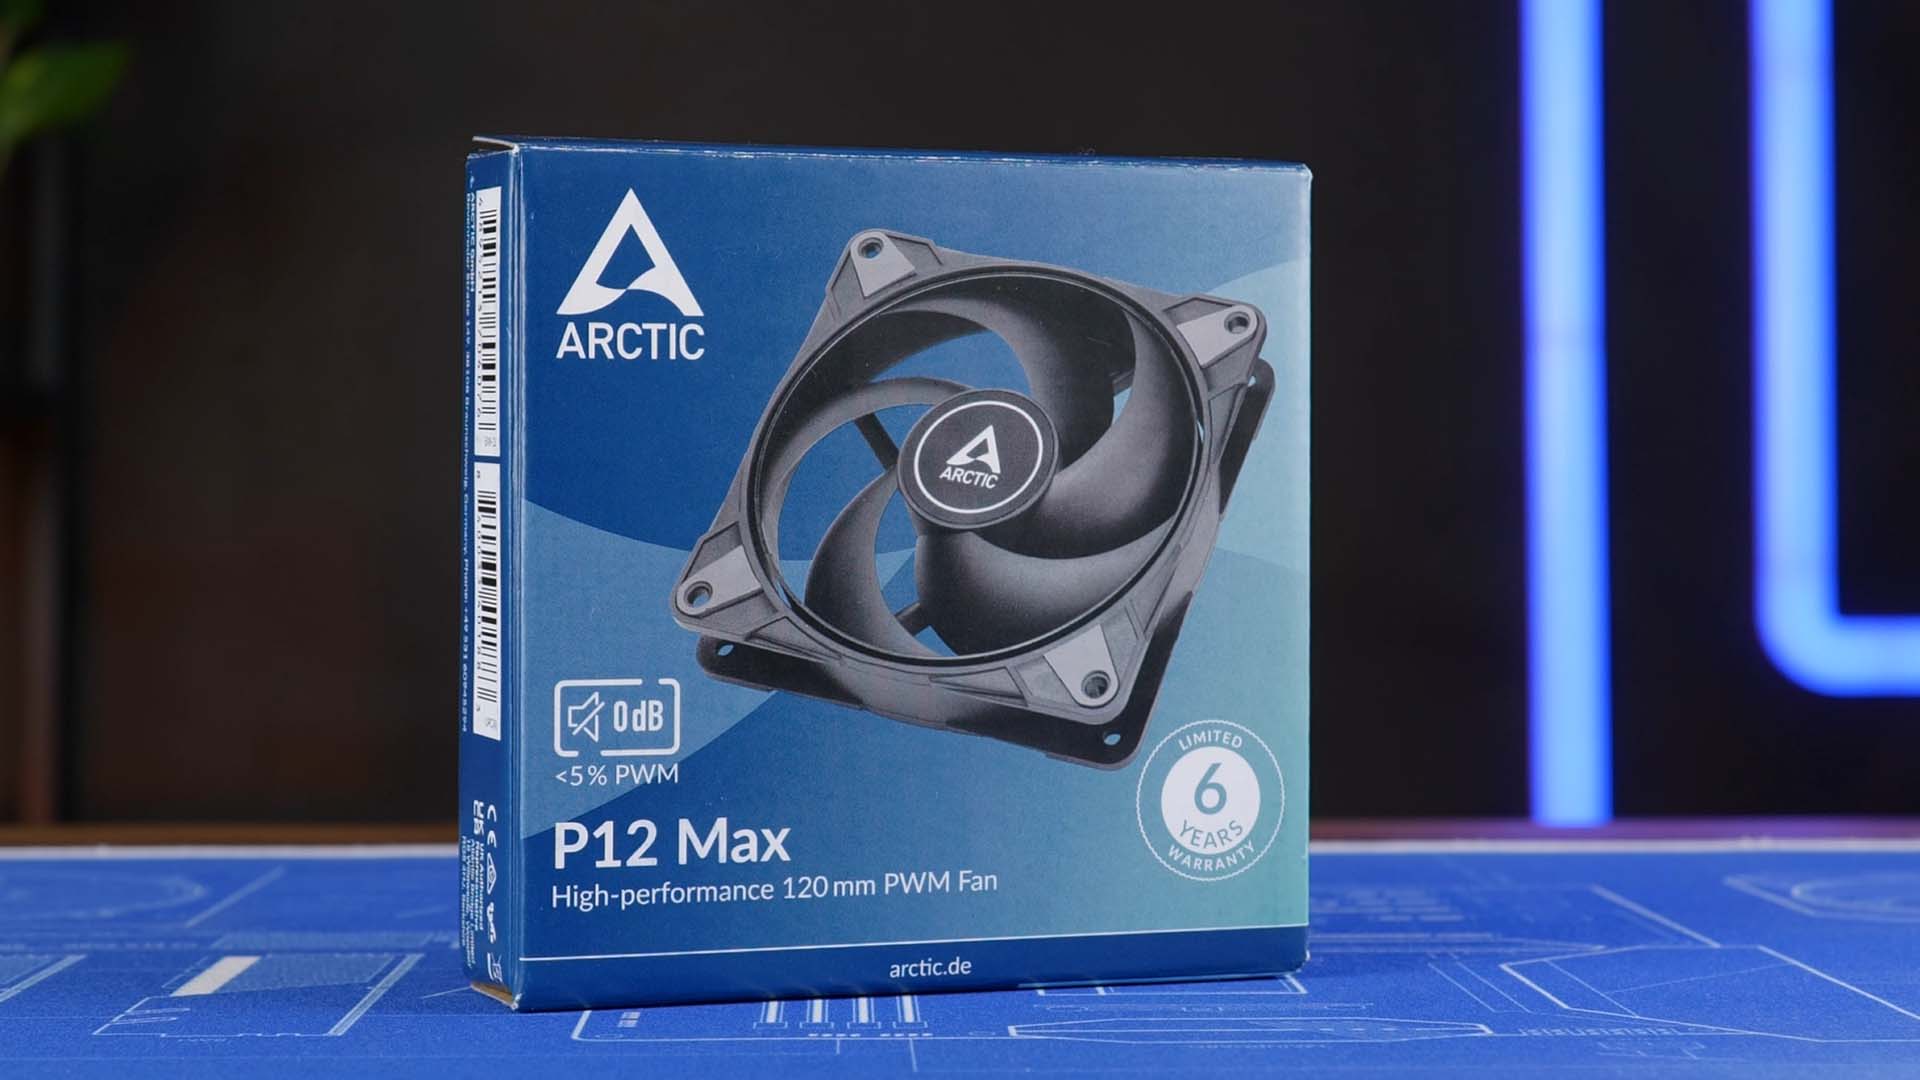 Arctic P12 Max is the cooling specialist's most powerful 120mm fan